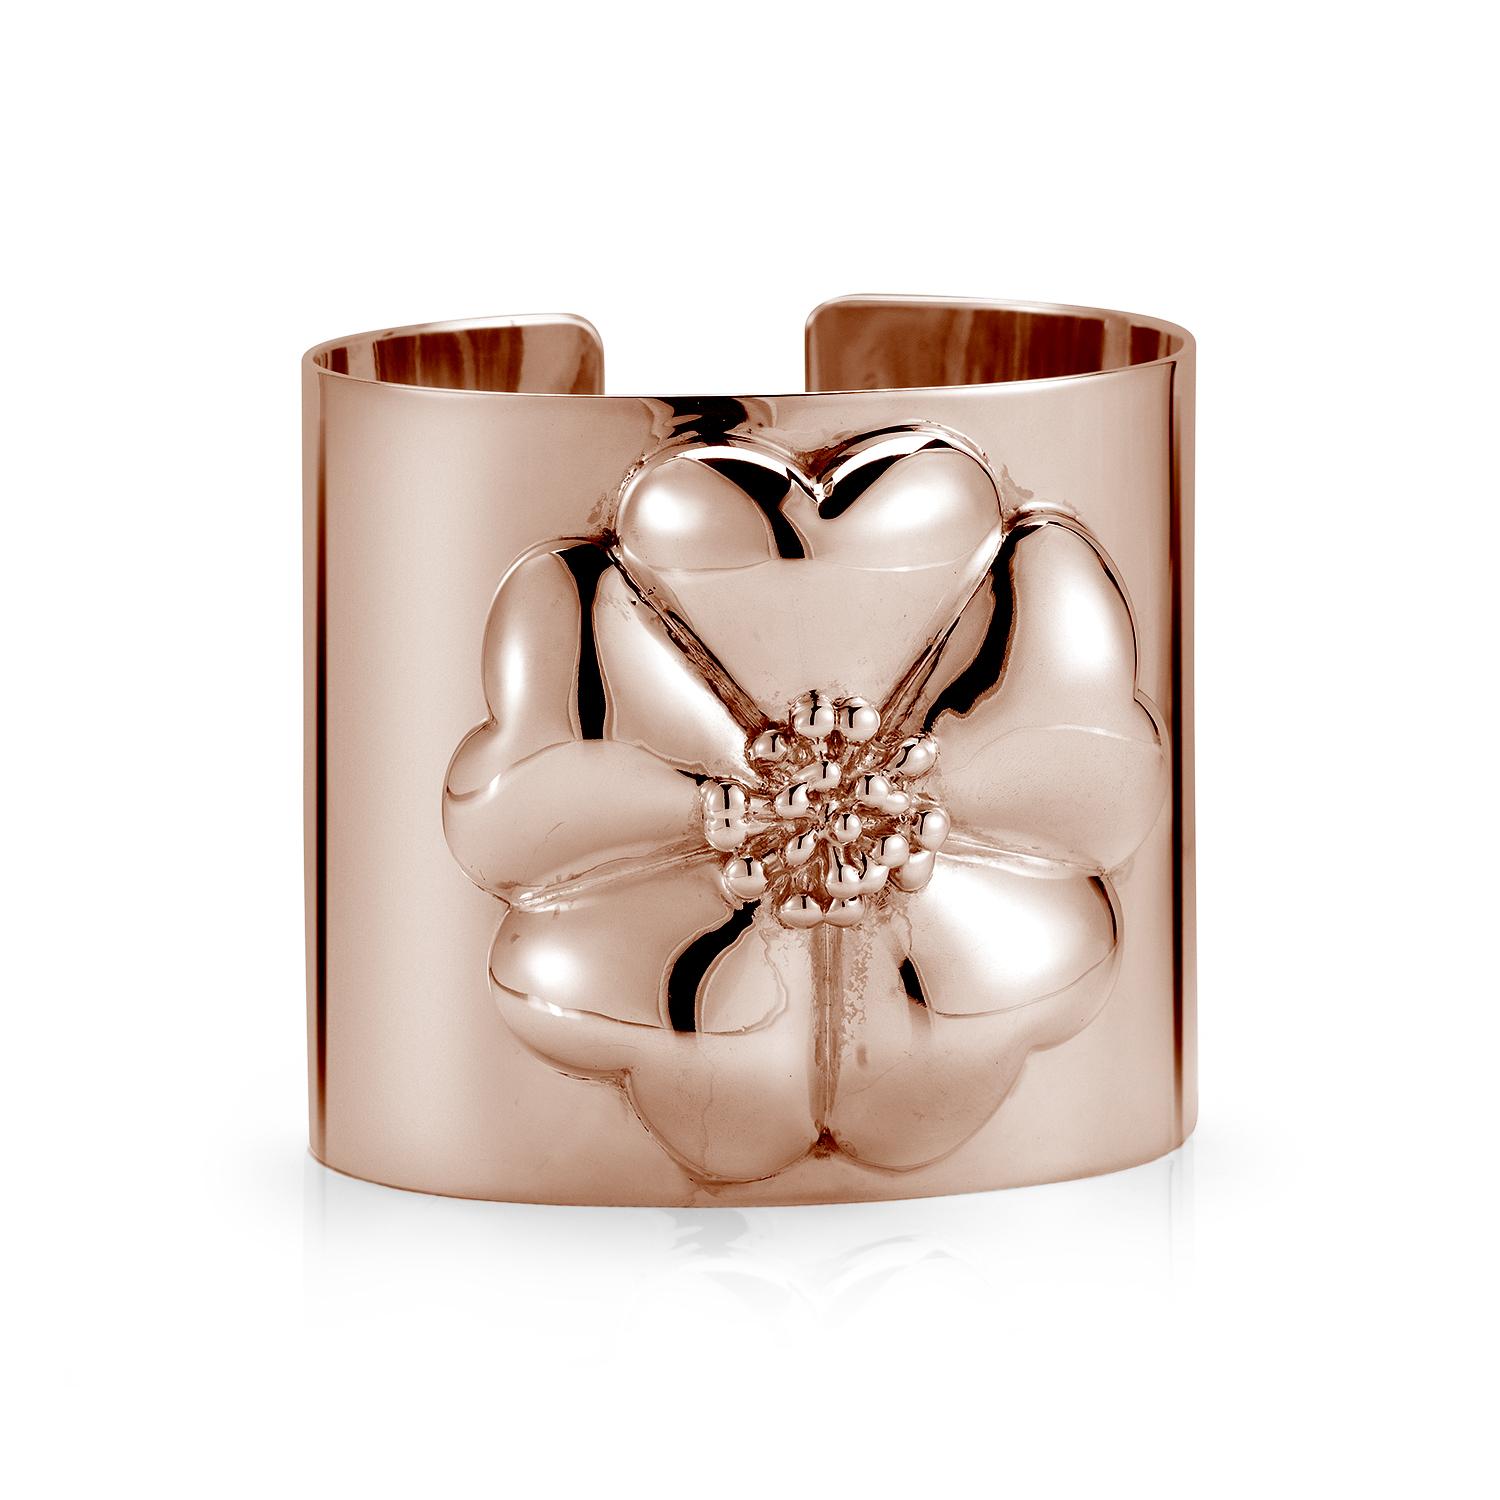 Designed in NYC

24k Gold Vermeil Blossom Large Cuff Bracelet. No matter the season, allow natural beauty to surround you wherever you go. Blossom large cuff bracelet: 

24k gold vermeil cuff and blossom also available in 24k rose gold vermeil and